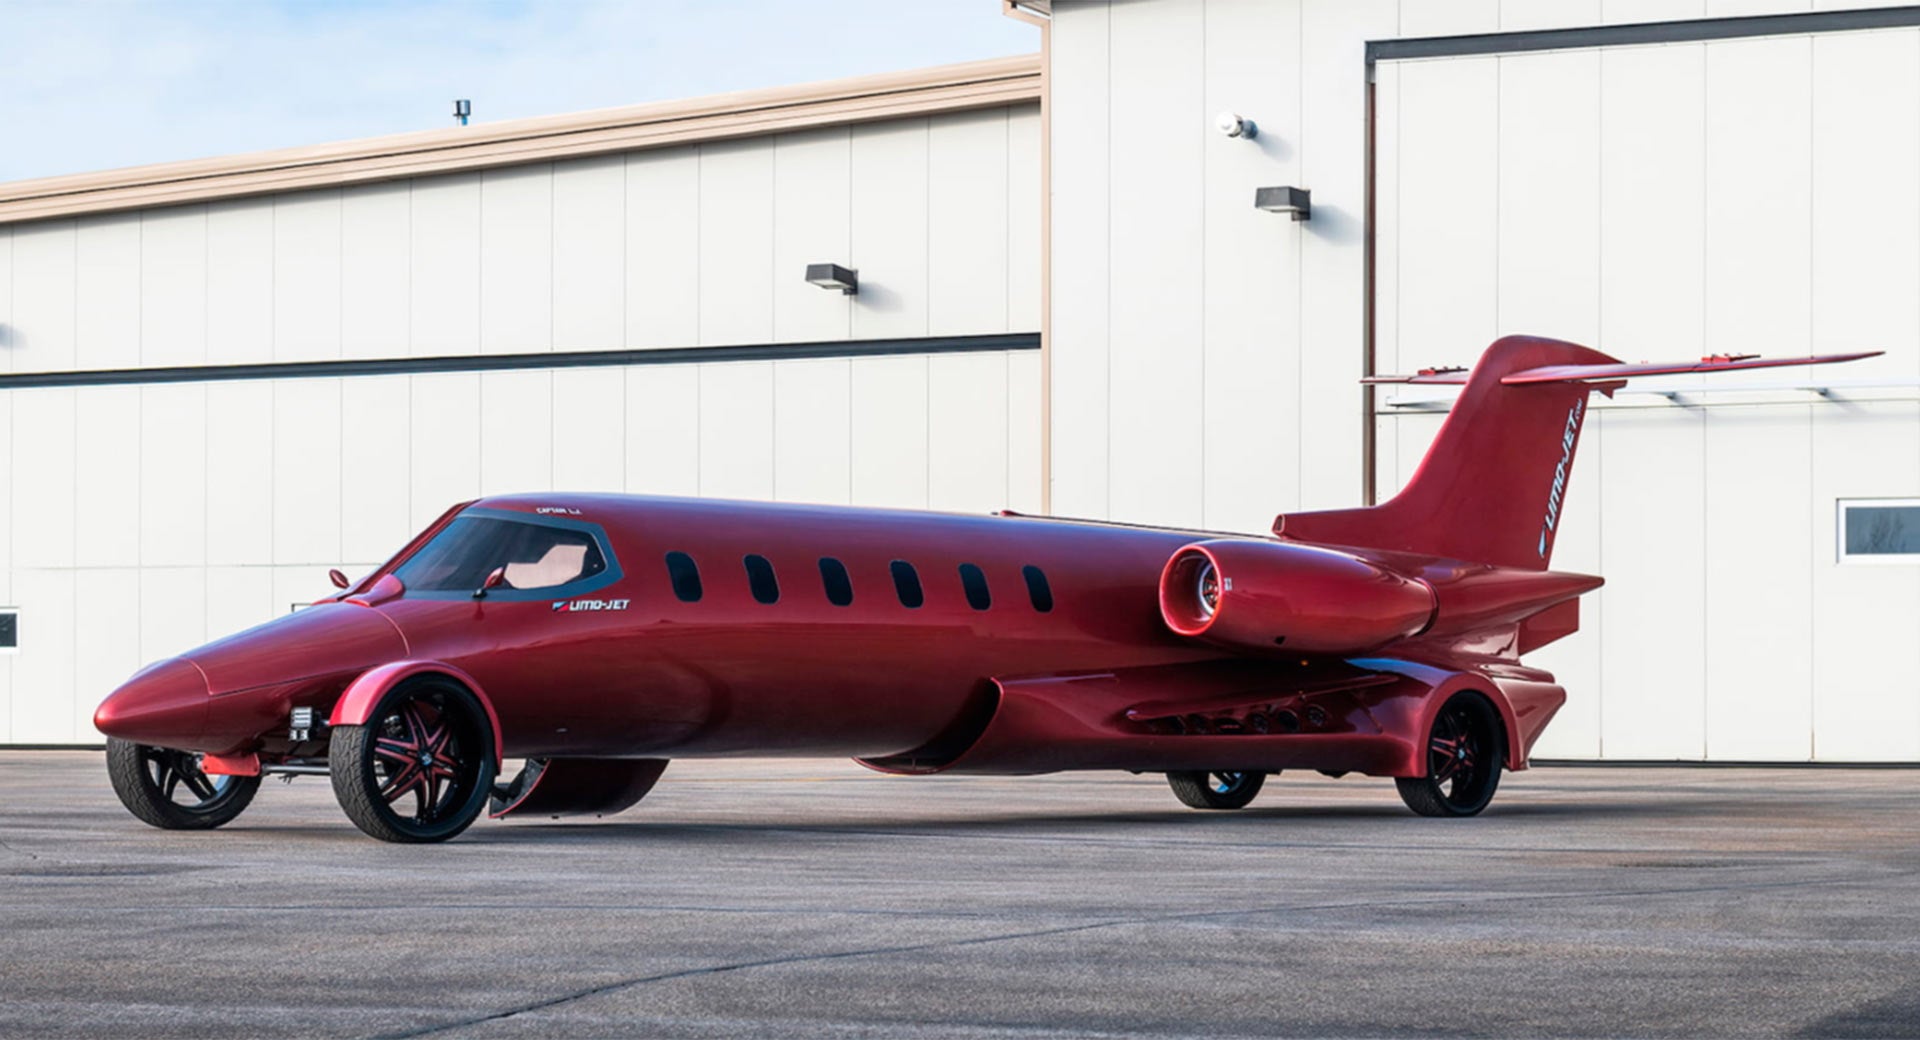 A Mitsubishi Dealership Is Selling a Wonderfully Ridiculous Learjet Limo